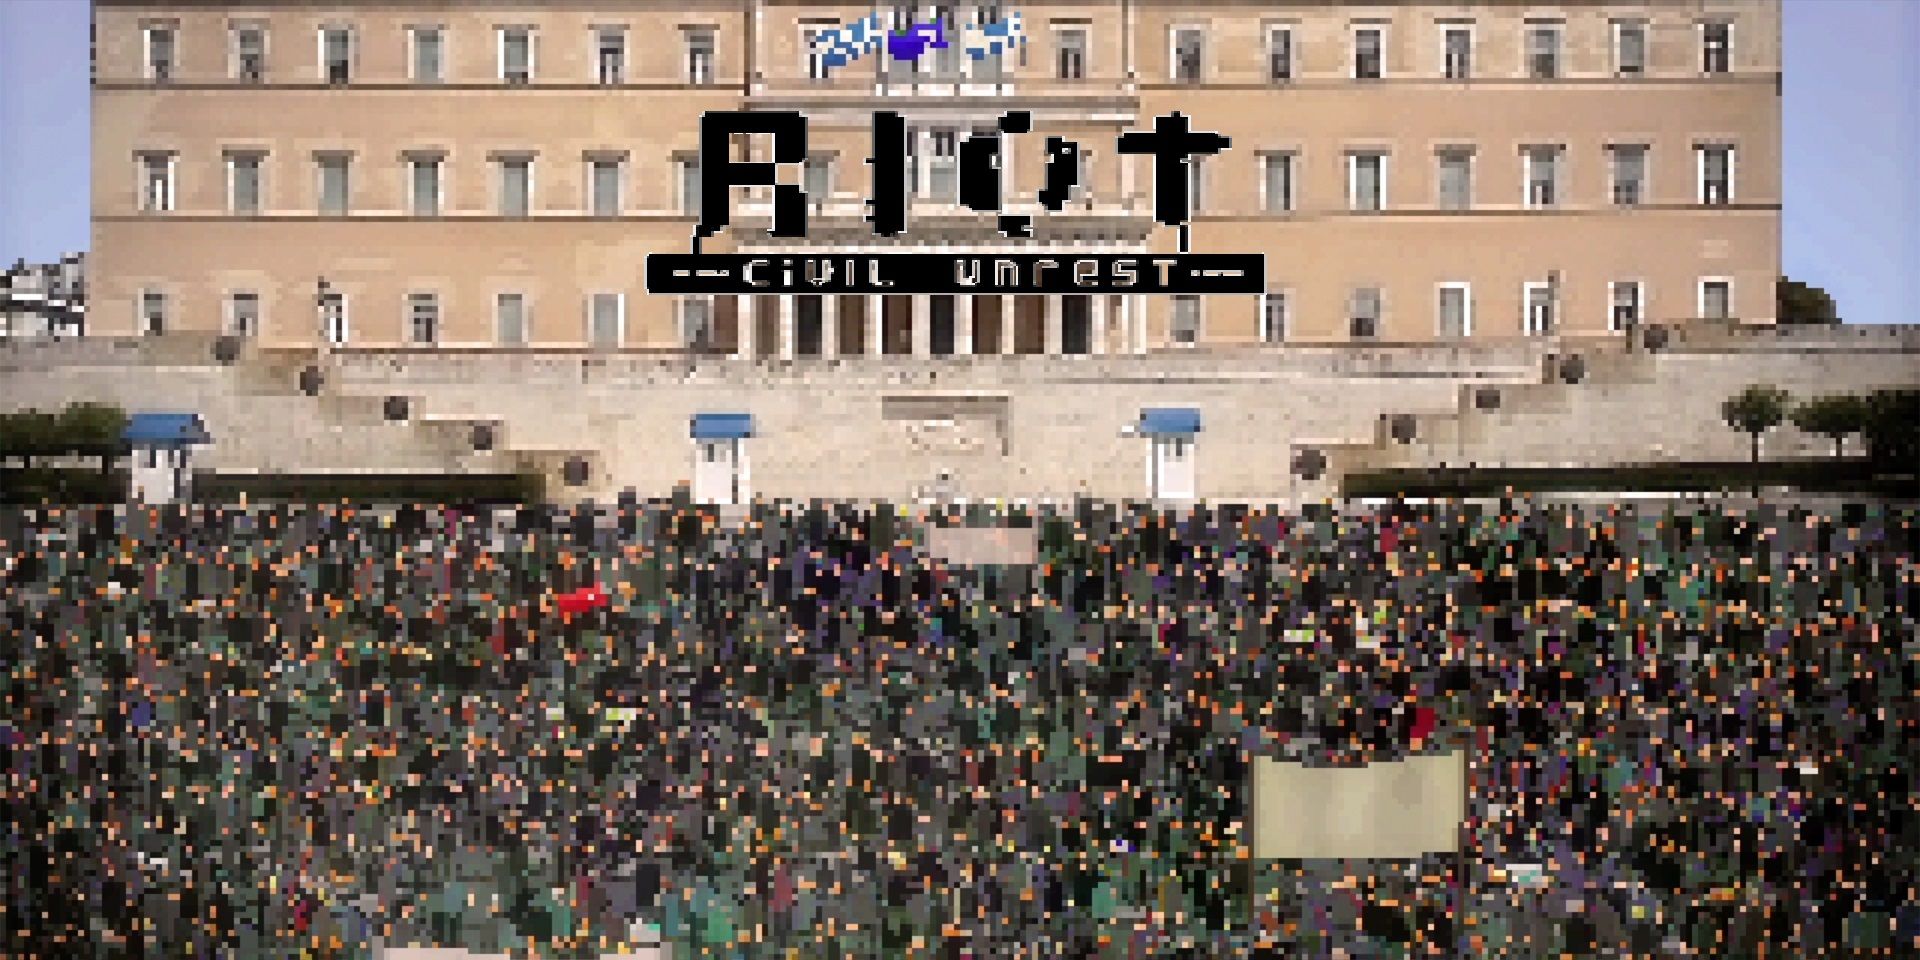 is the riot civil unrest a couch co op game